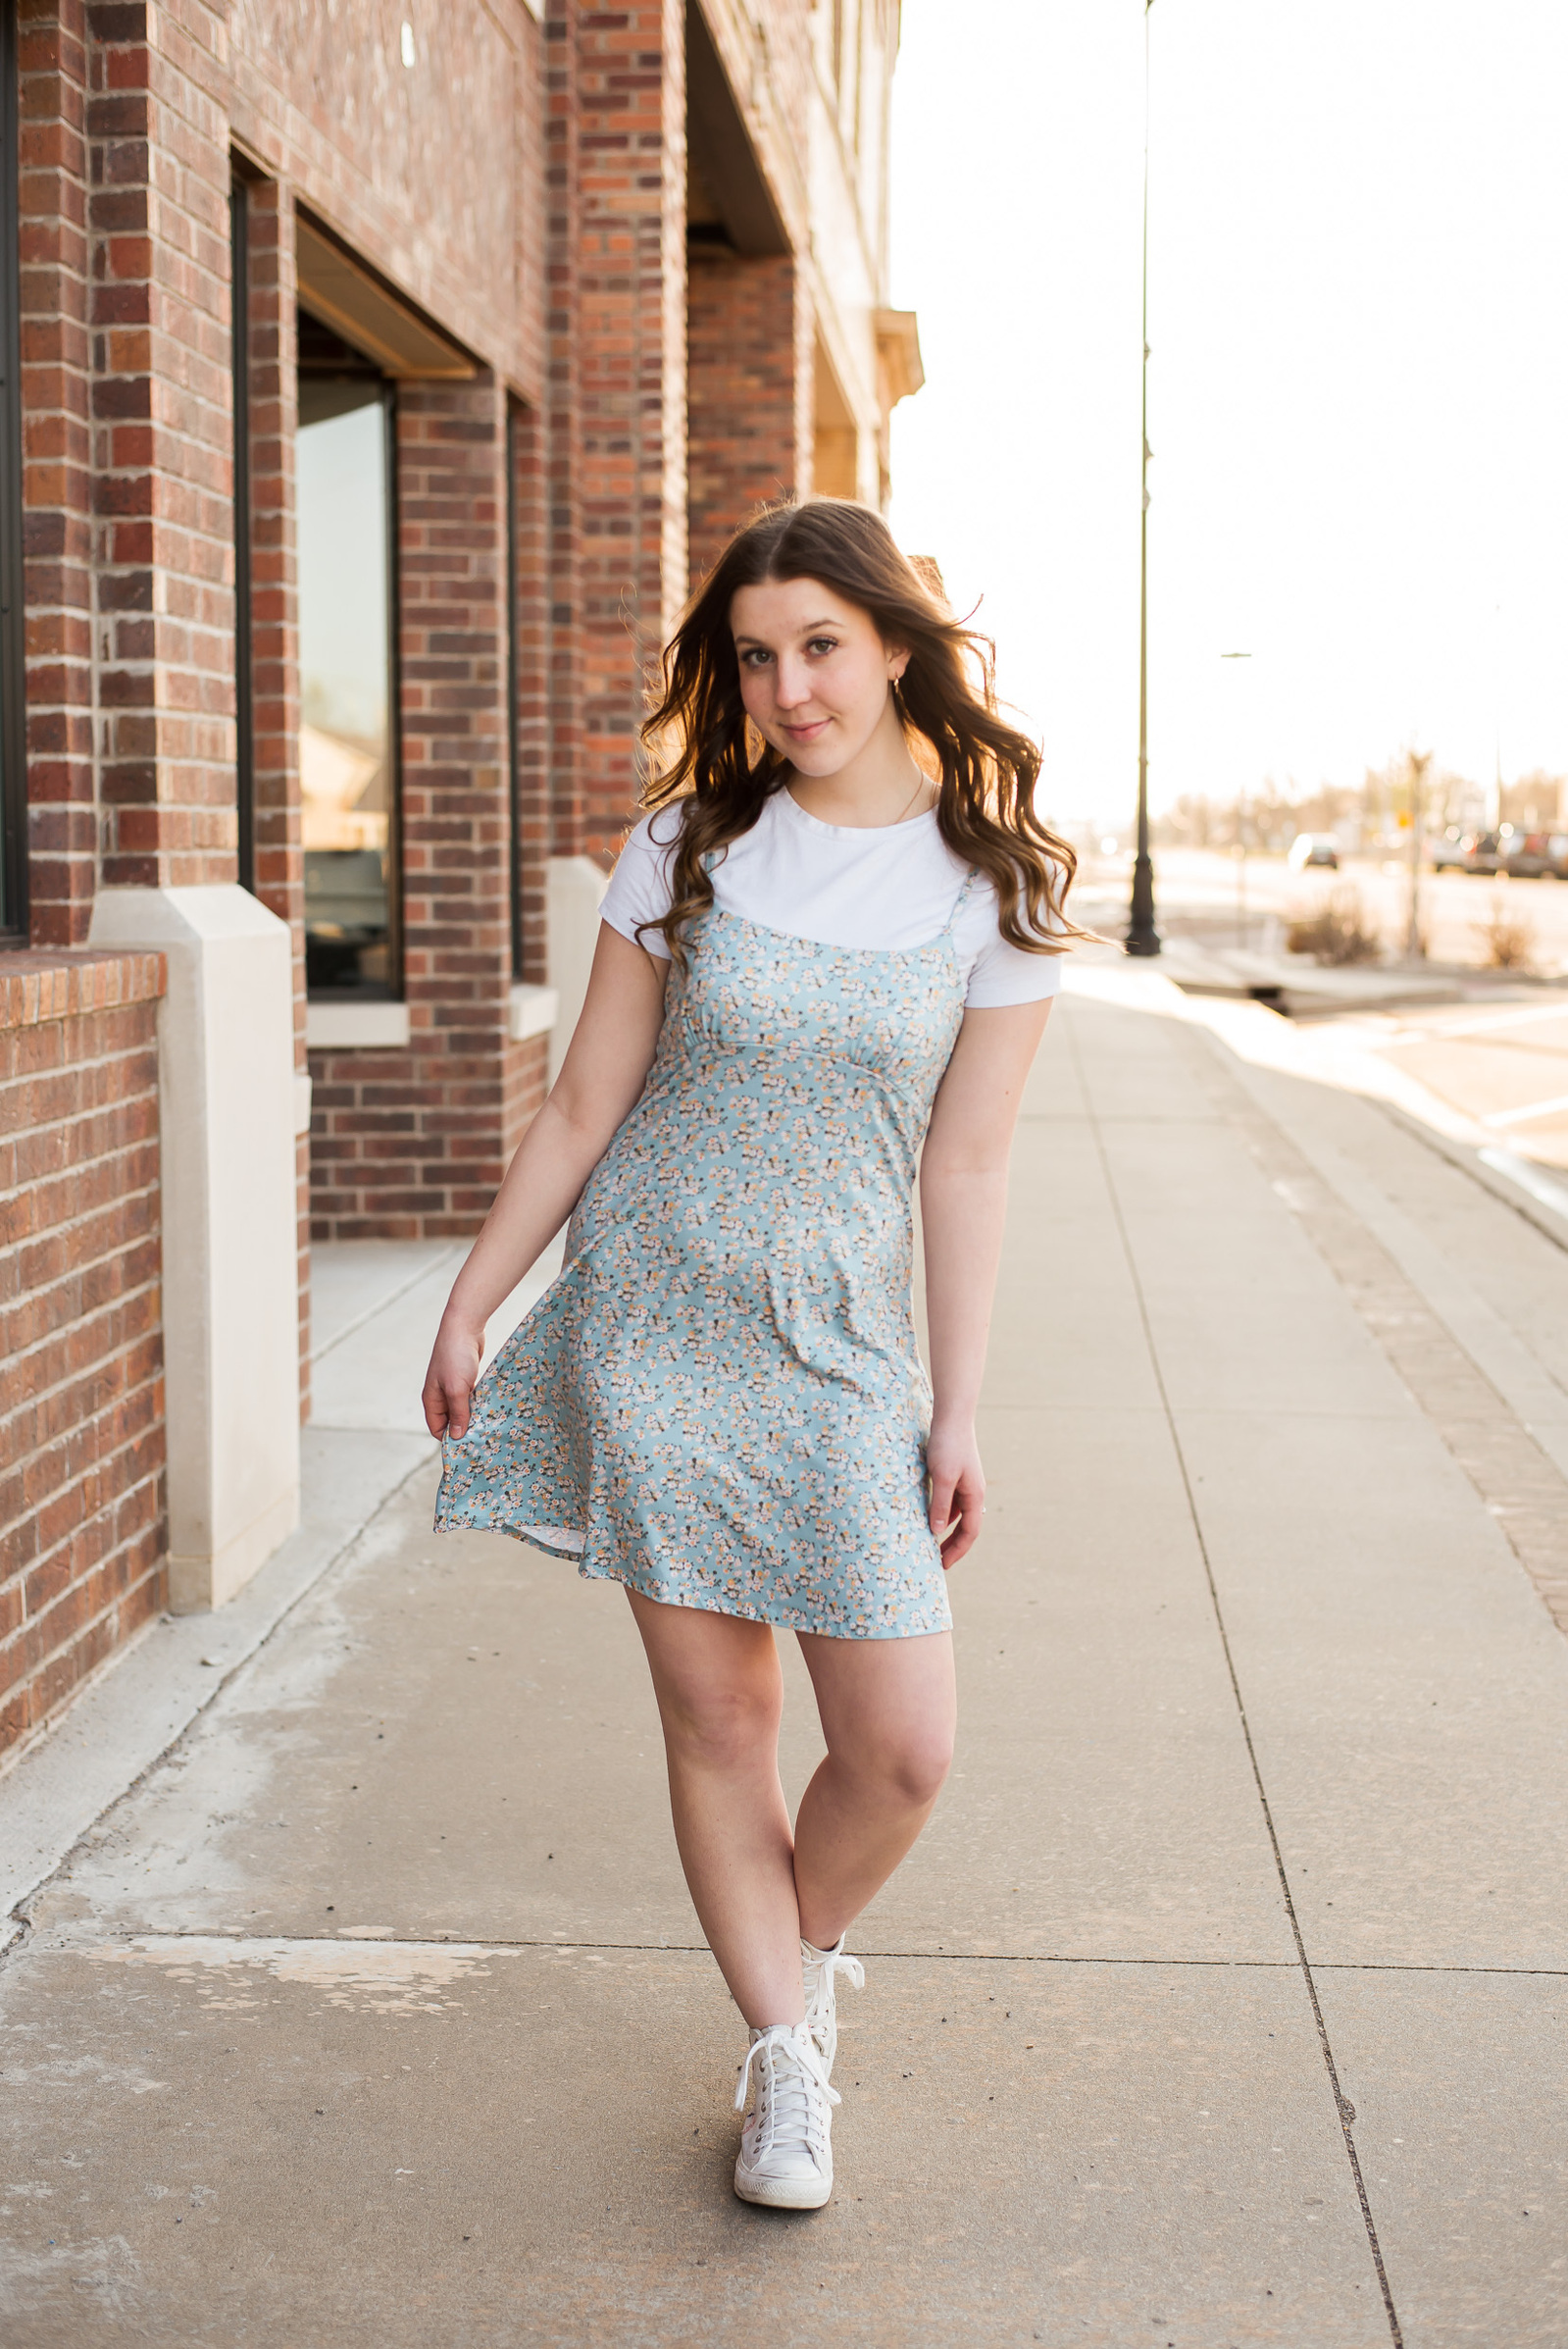 senior girl wearing a light blue sundress with white tee underneath and sneakers walks on a downtown sidewalk and smiles in a small town in Oklahoma